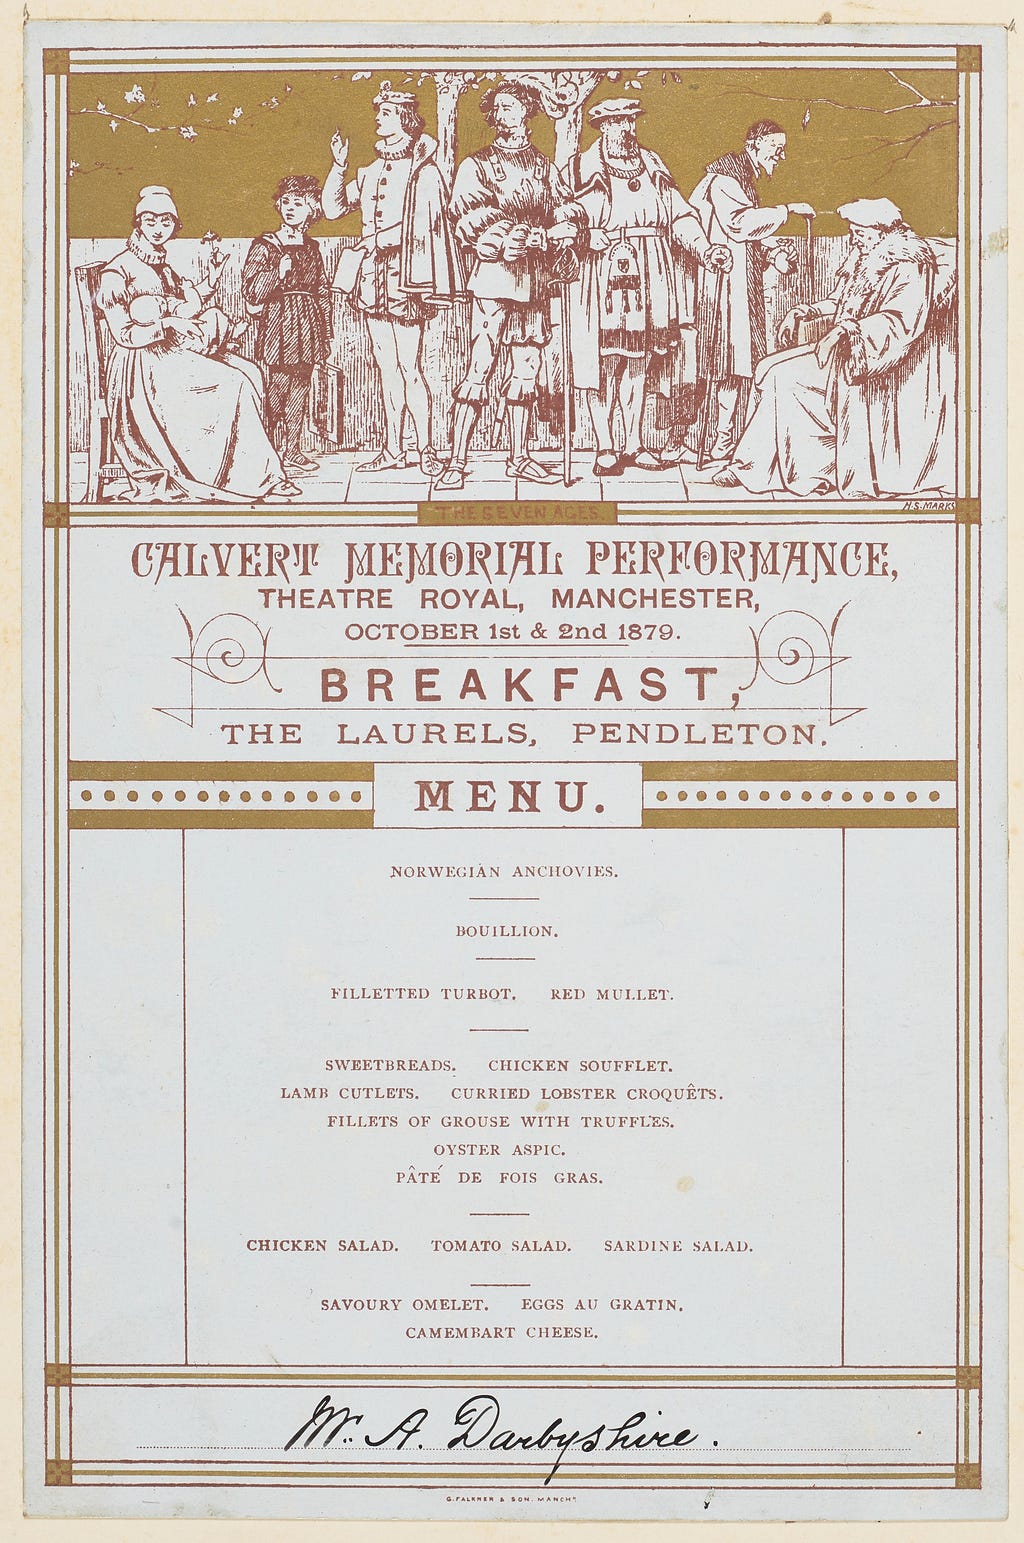 Breakfast menu printed in gold with design at head showing seven figures in Shakespearean dress, five standing, two seated.